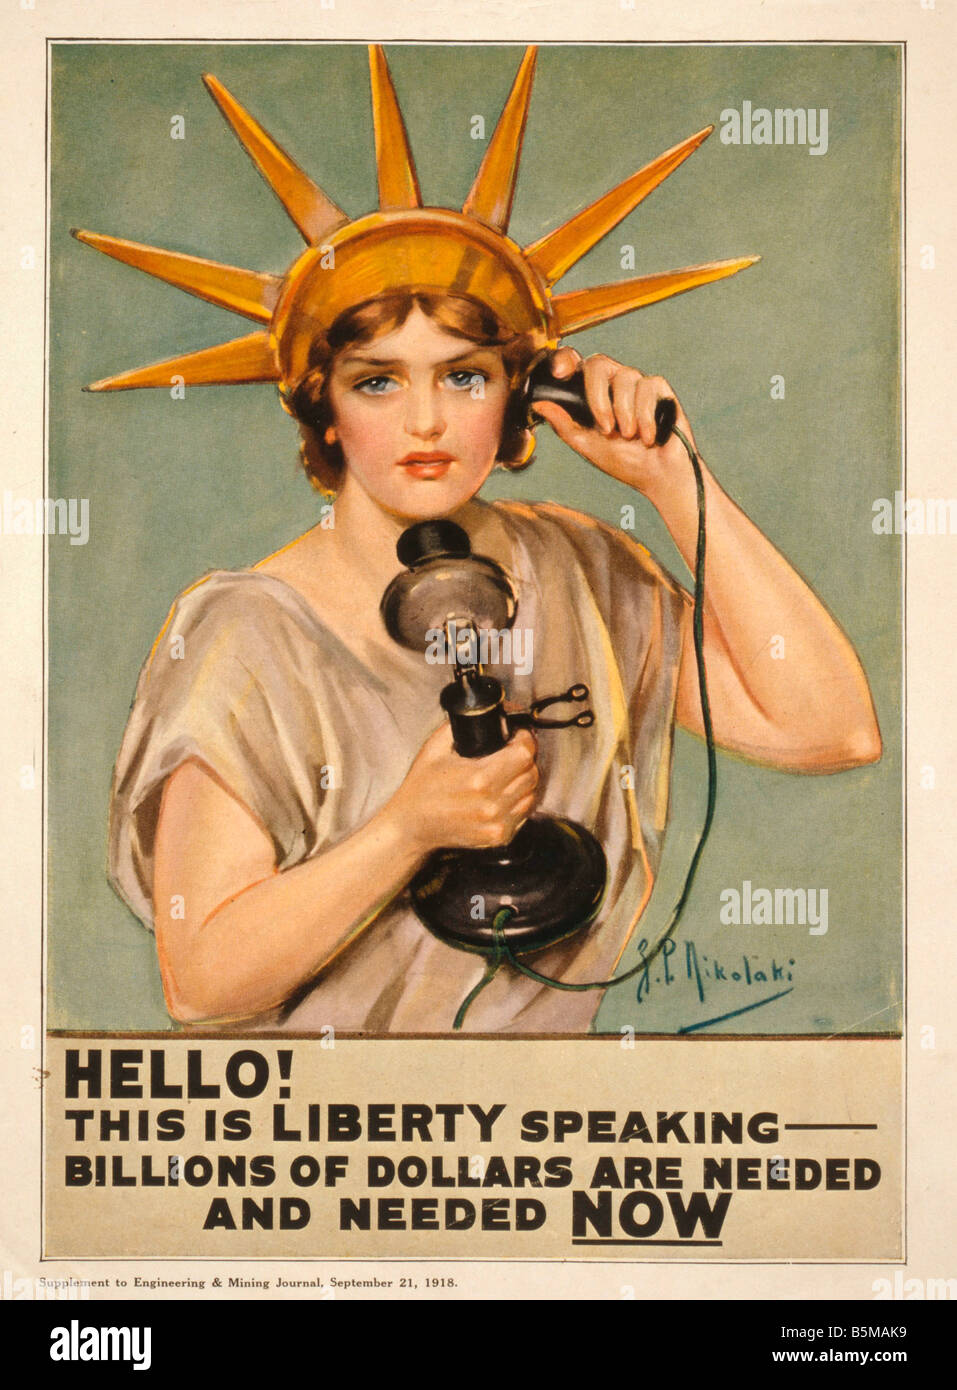 2 G55 W2 1918 10 WW I USA Appeal for Funds Poster 1918 History World War I Wartime Economy Hello This is Liberty speaking billio Stock Photo